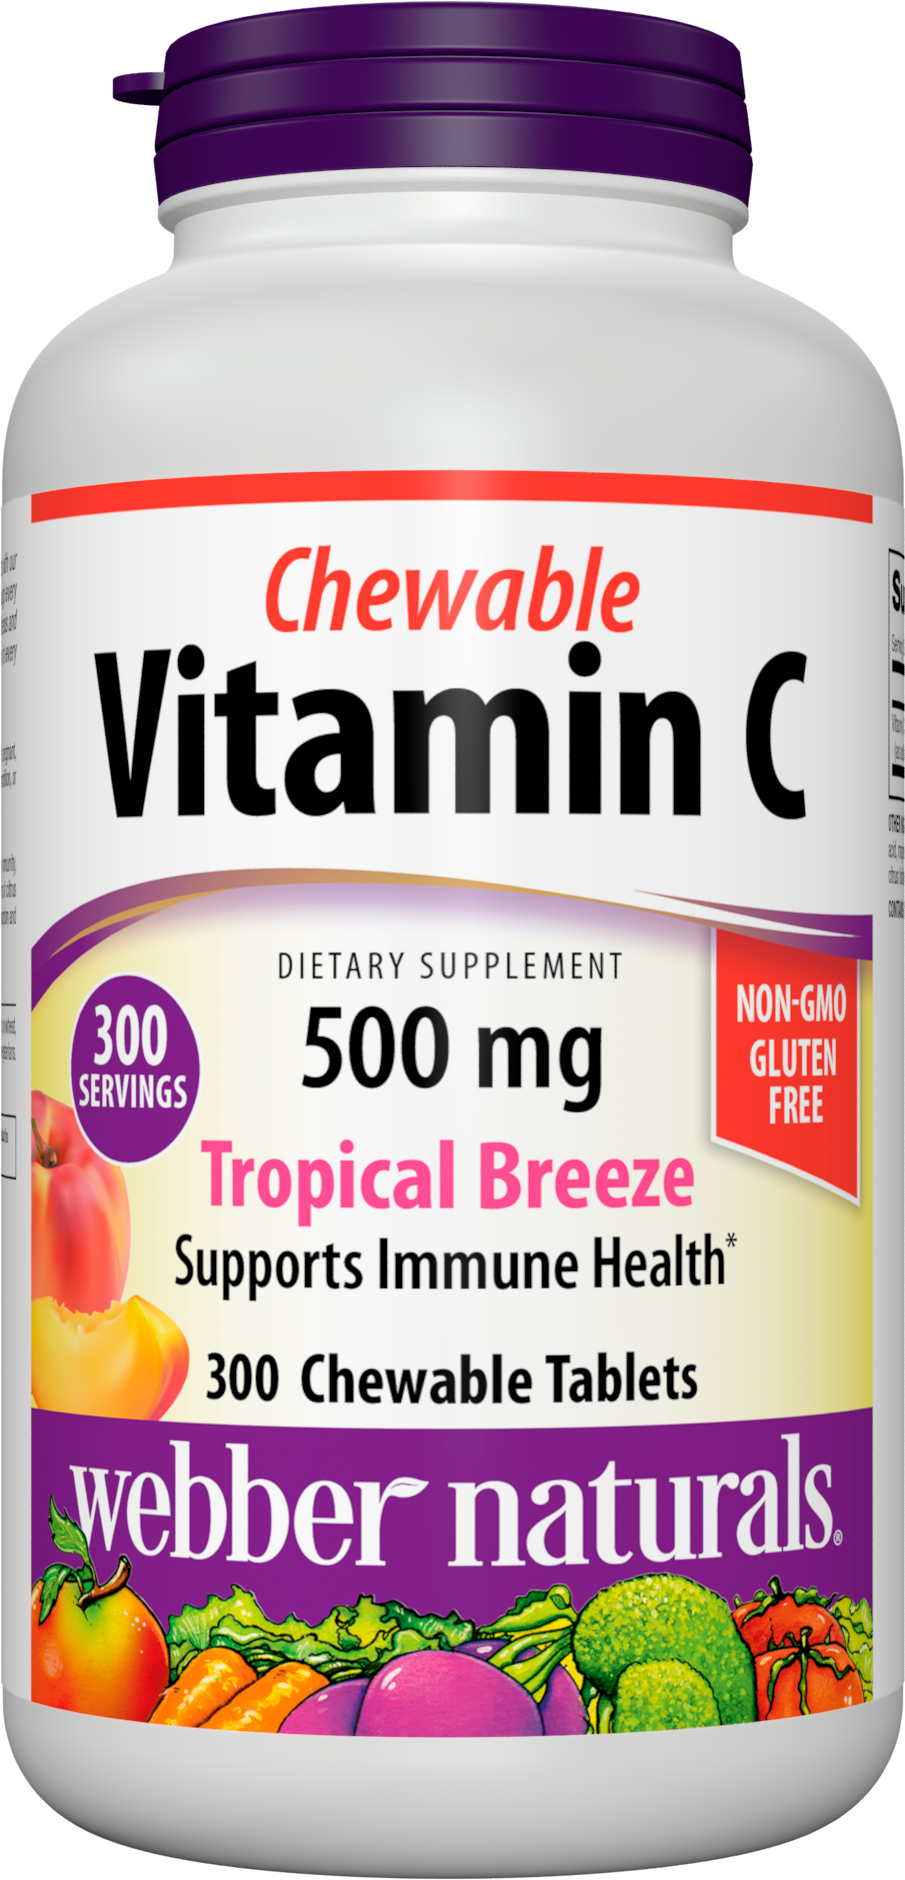 Webber Naturals Chewable Tropical Breeze Vitamin C, 300 Count, 500 mg of Vitamin C Per Chewable Tablet, Bones, Teeth, Immune and Antioxidant Support, Non GMO, Dairy & Gluten Free